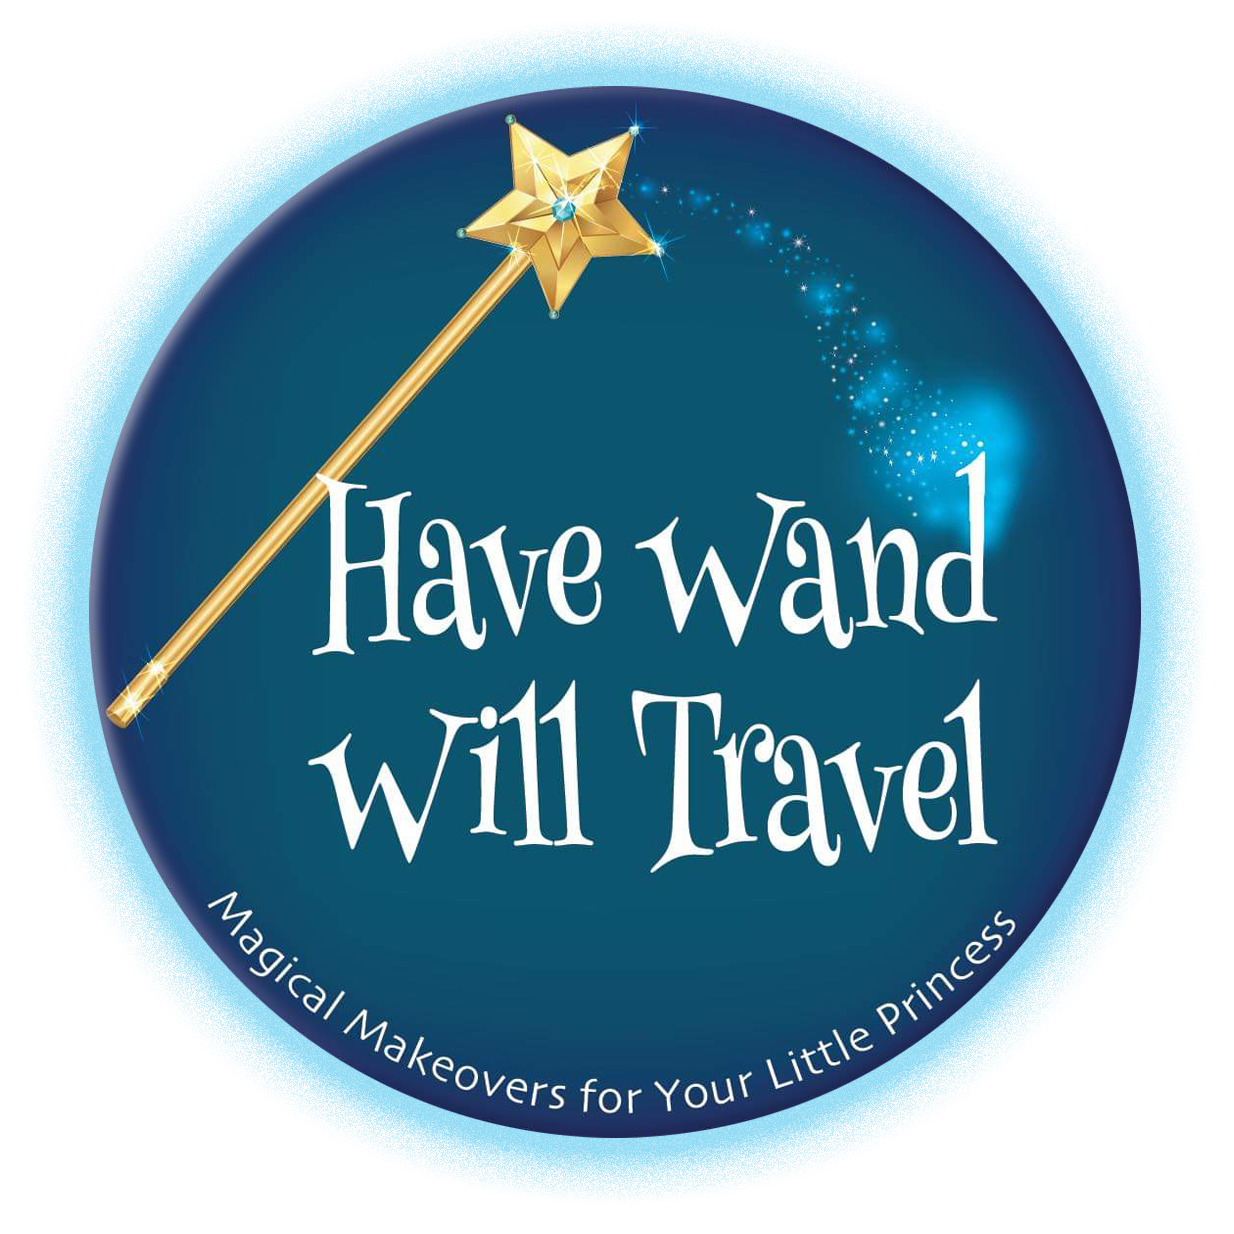 Have Wand Will Travel